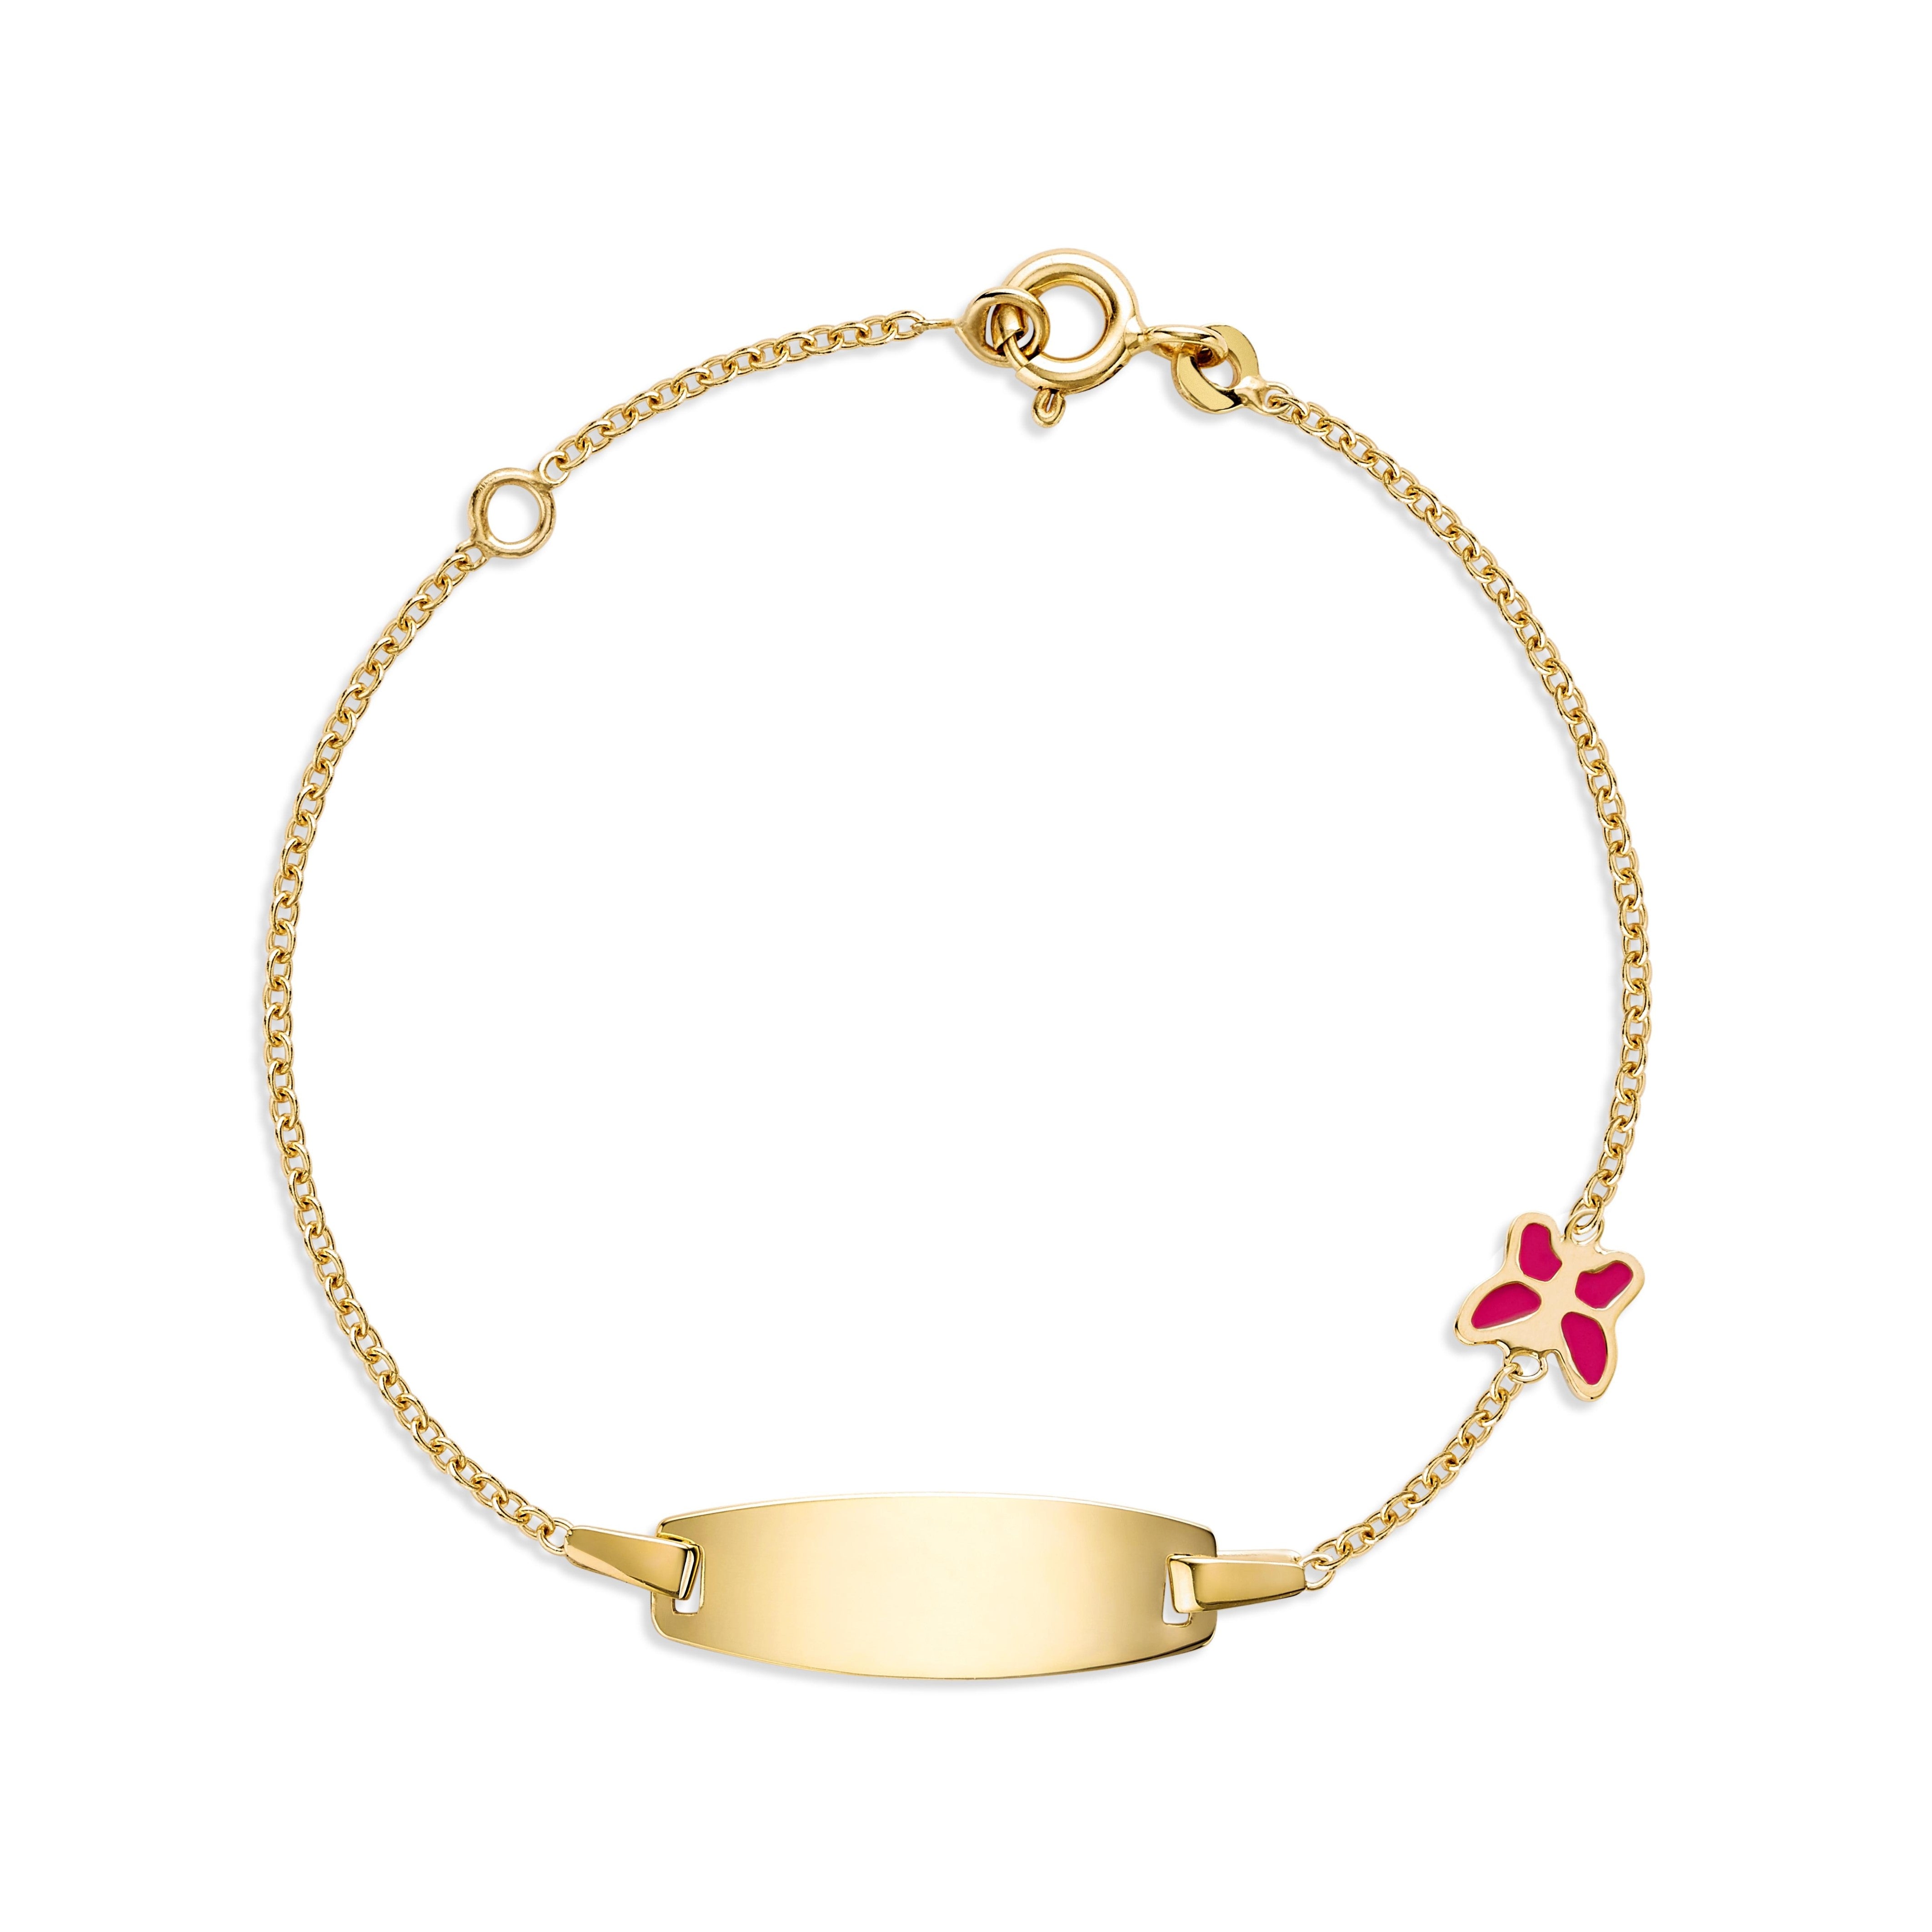 UNICORNJ 14k Yellow Gold Girls ID Bracelet Engravable with Enamel Charm for Girls Kids Toddler Baby Made in Italy 5.5"